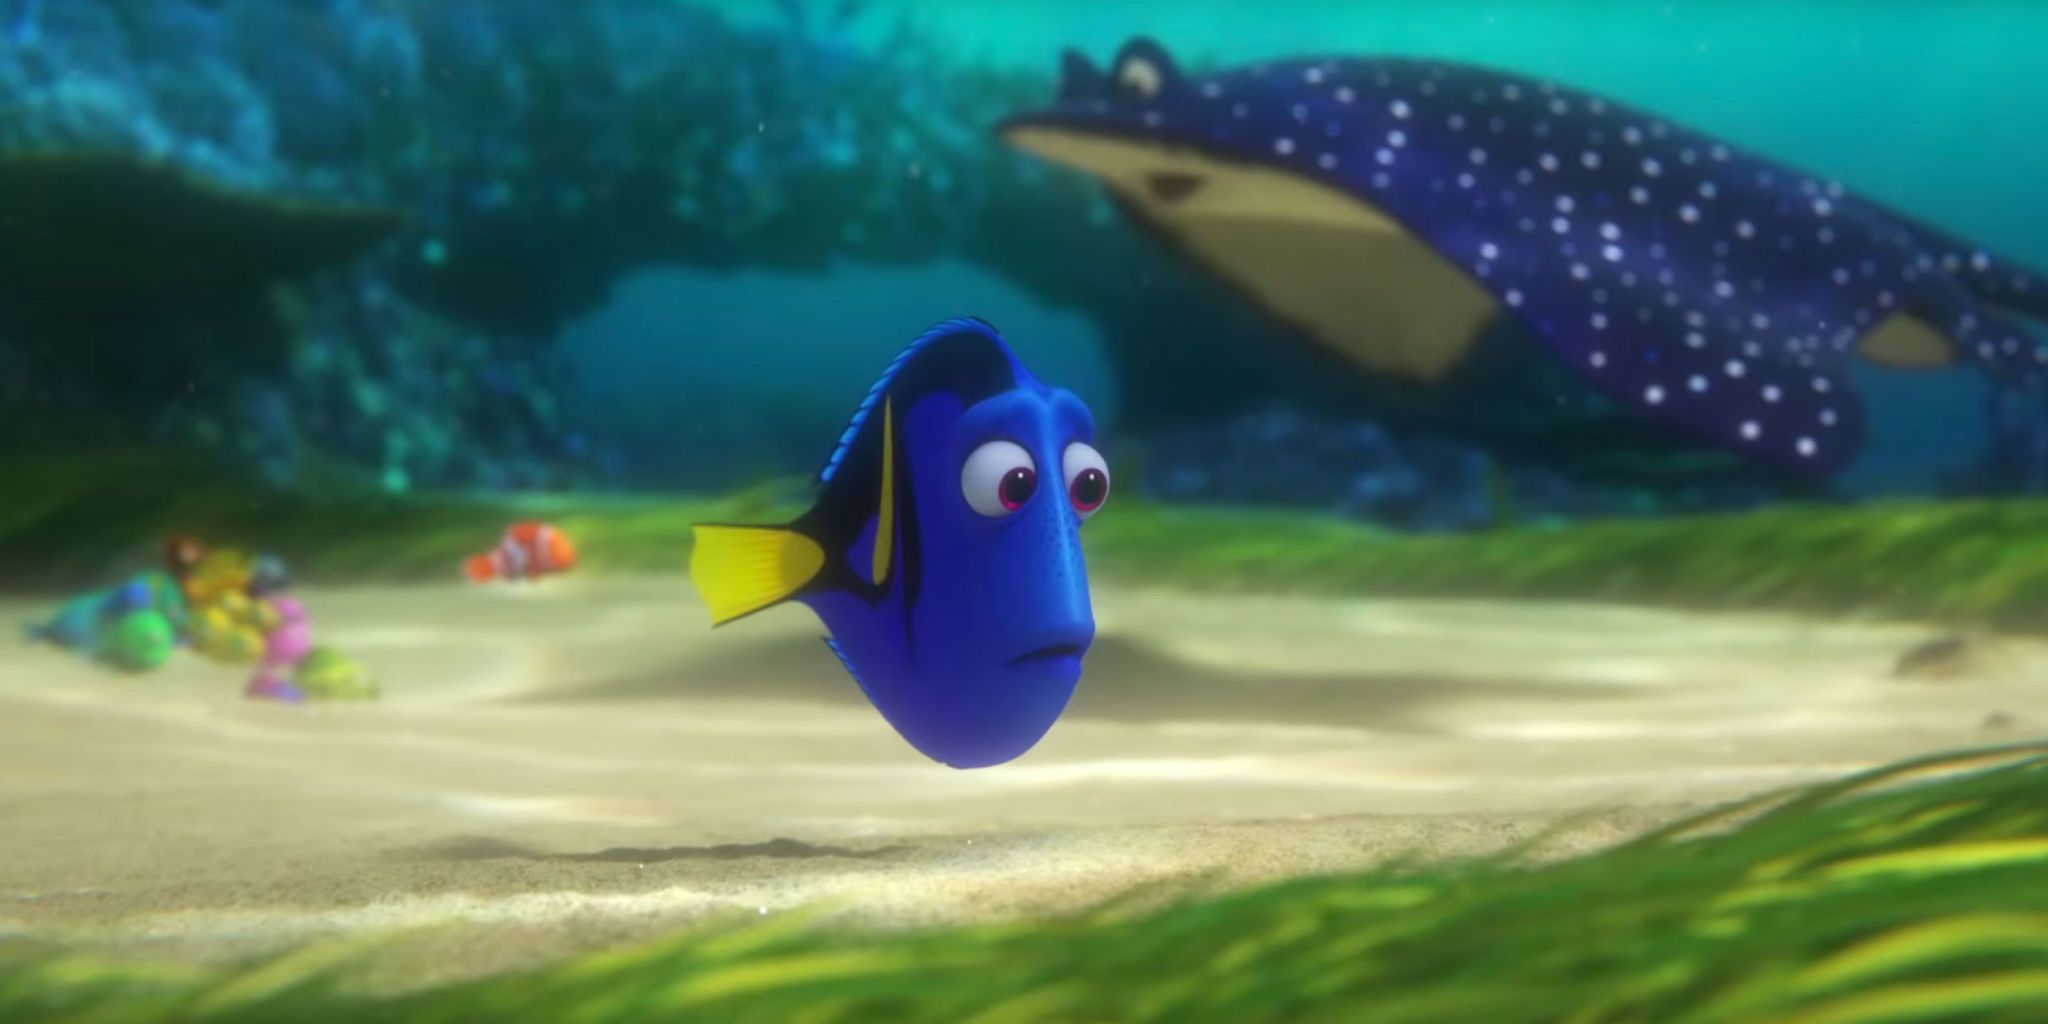 finding dory full movie in hindi free download hd 1080p